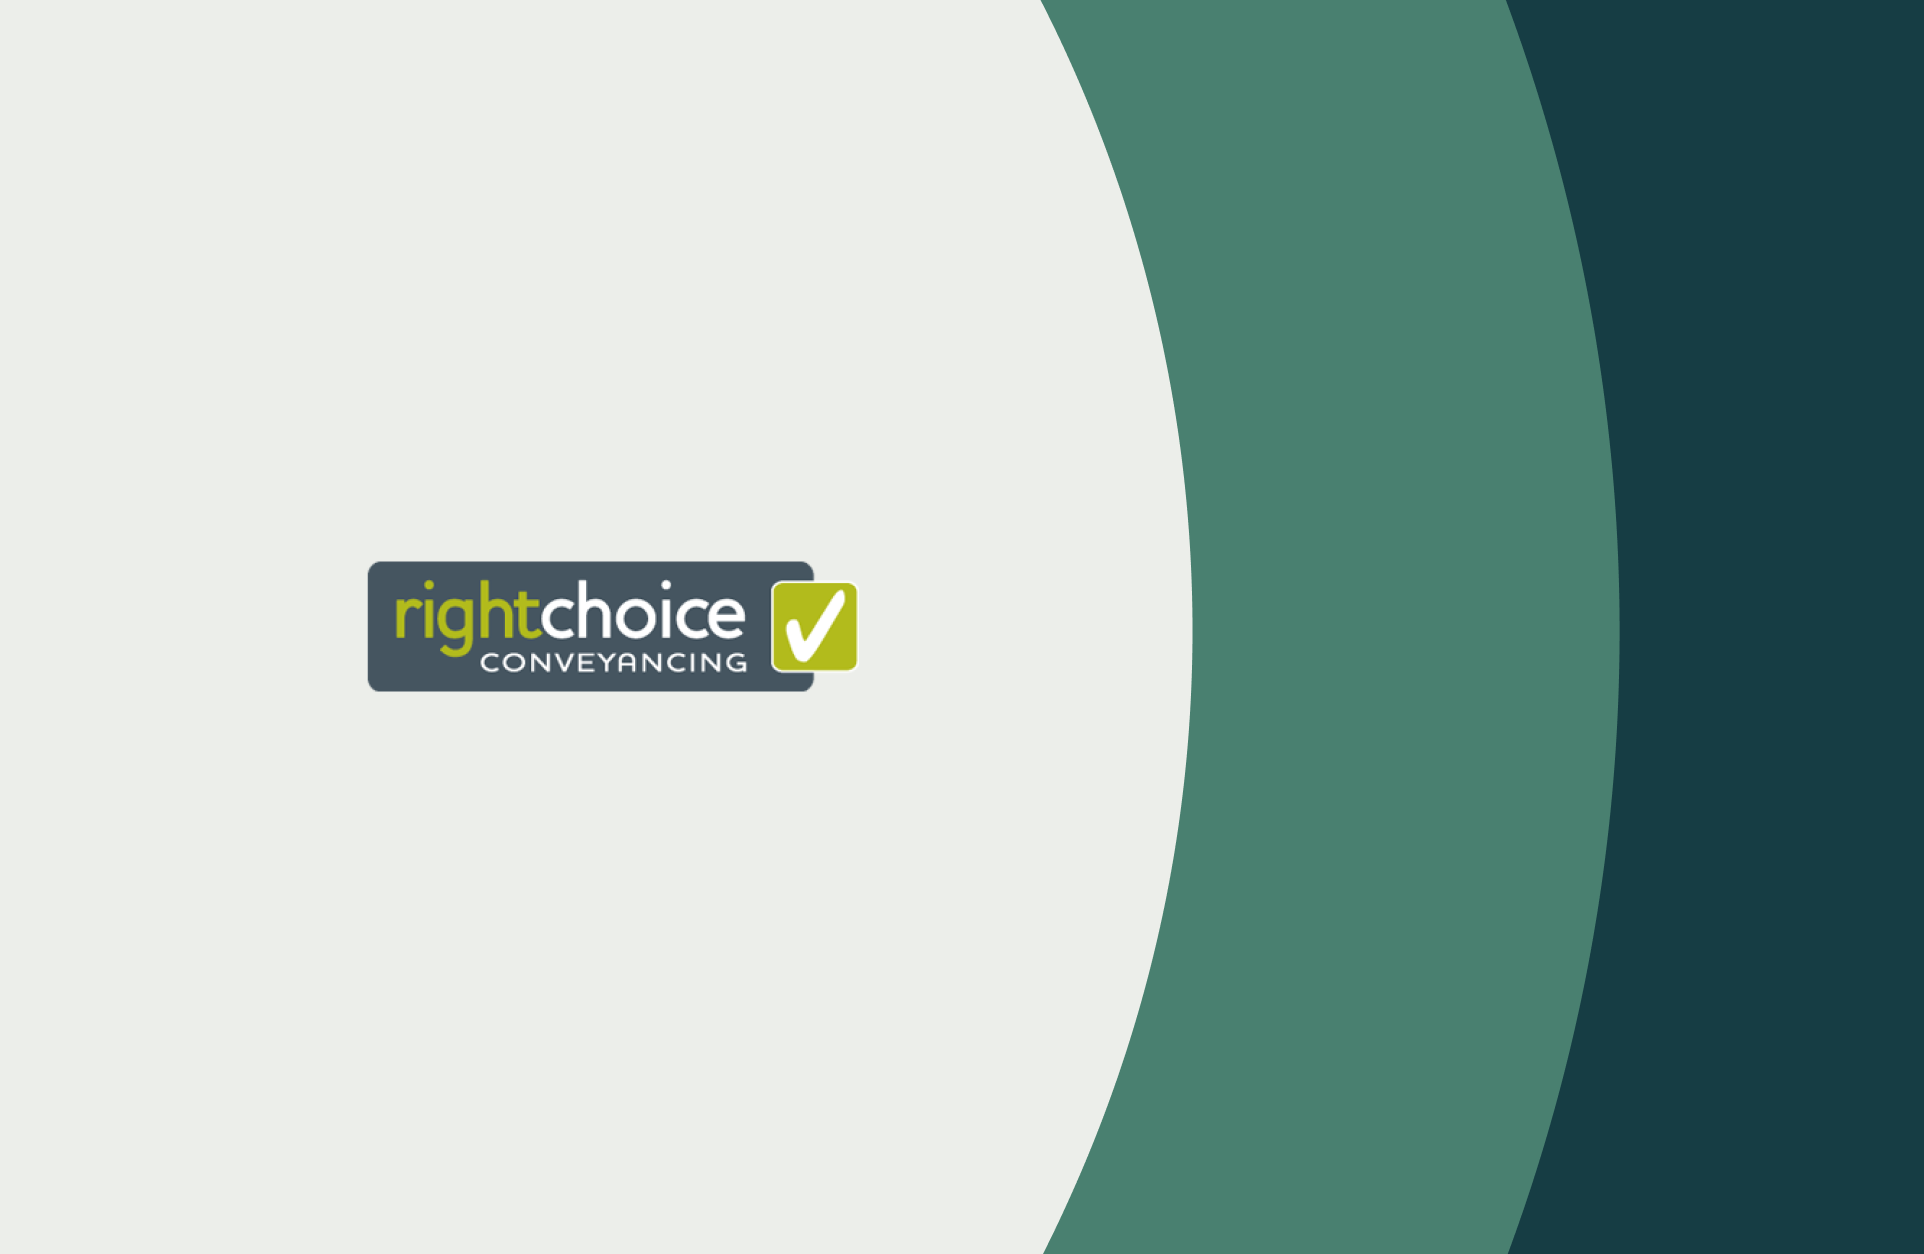 Right Choice Conveyancing logo on a grey background with two large green graphic elements on the left